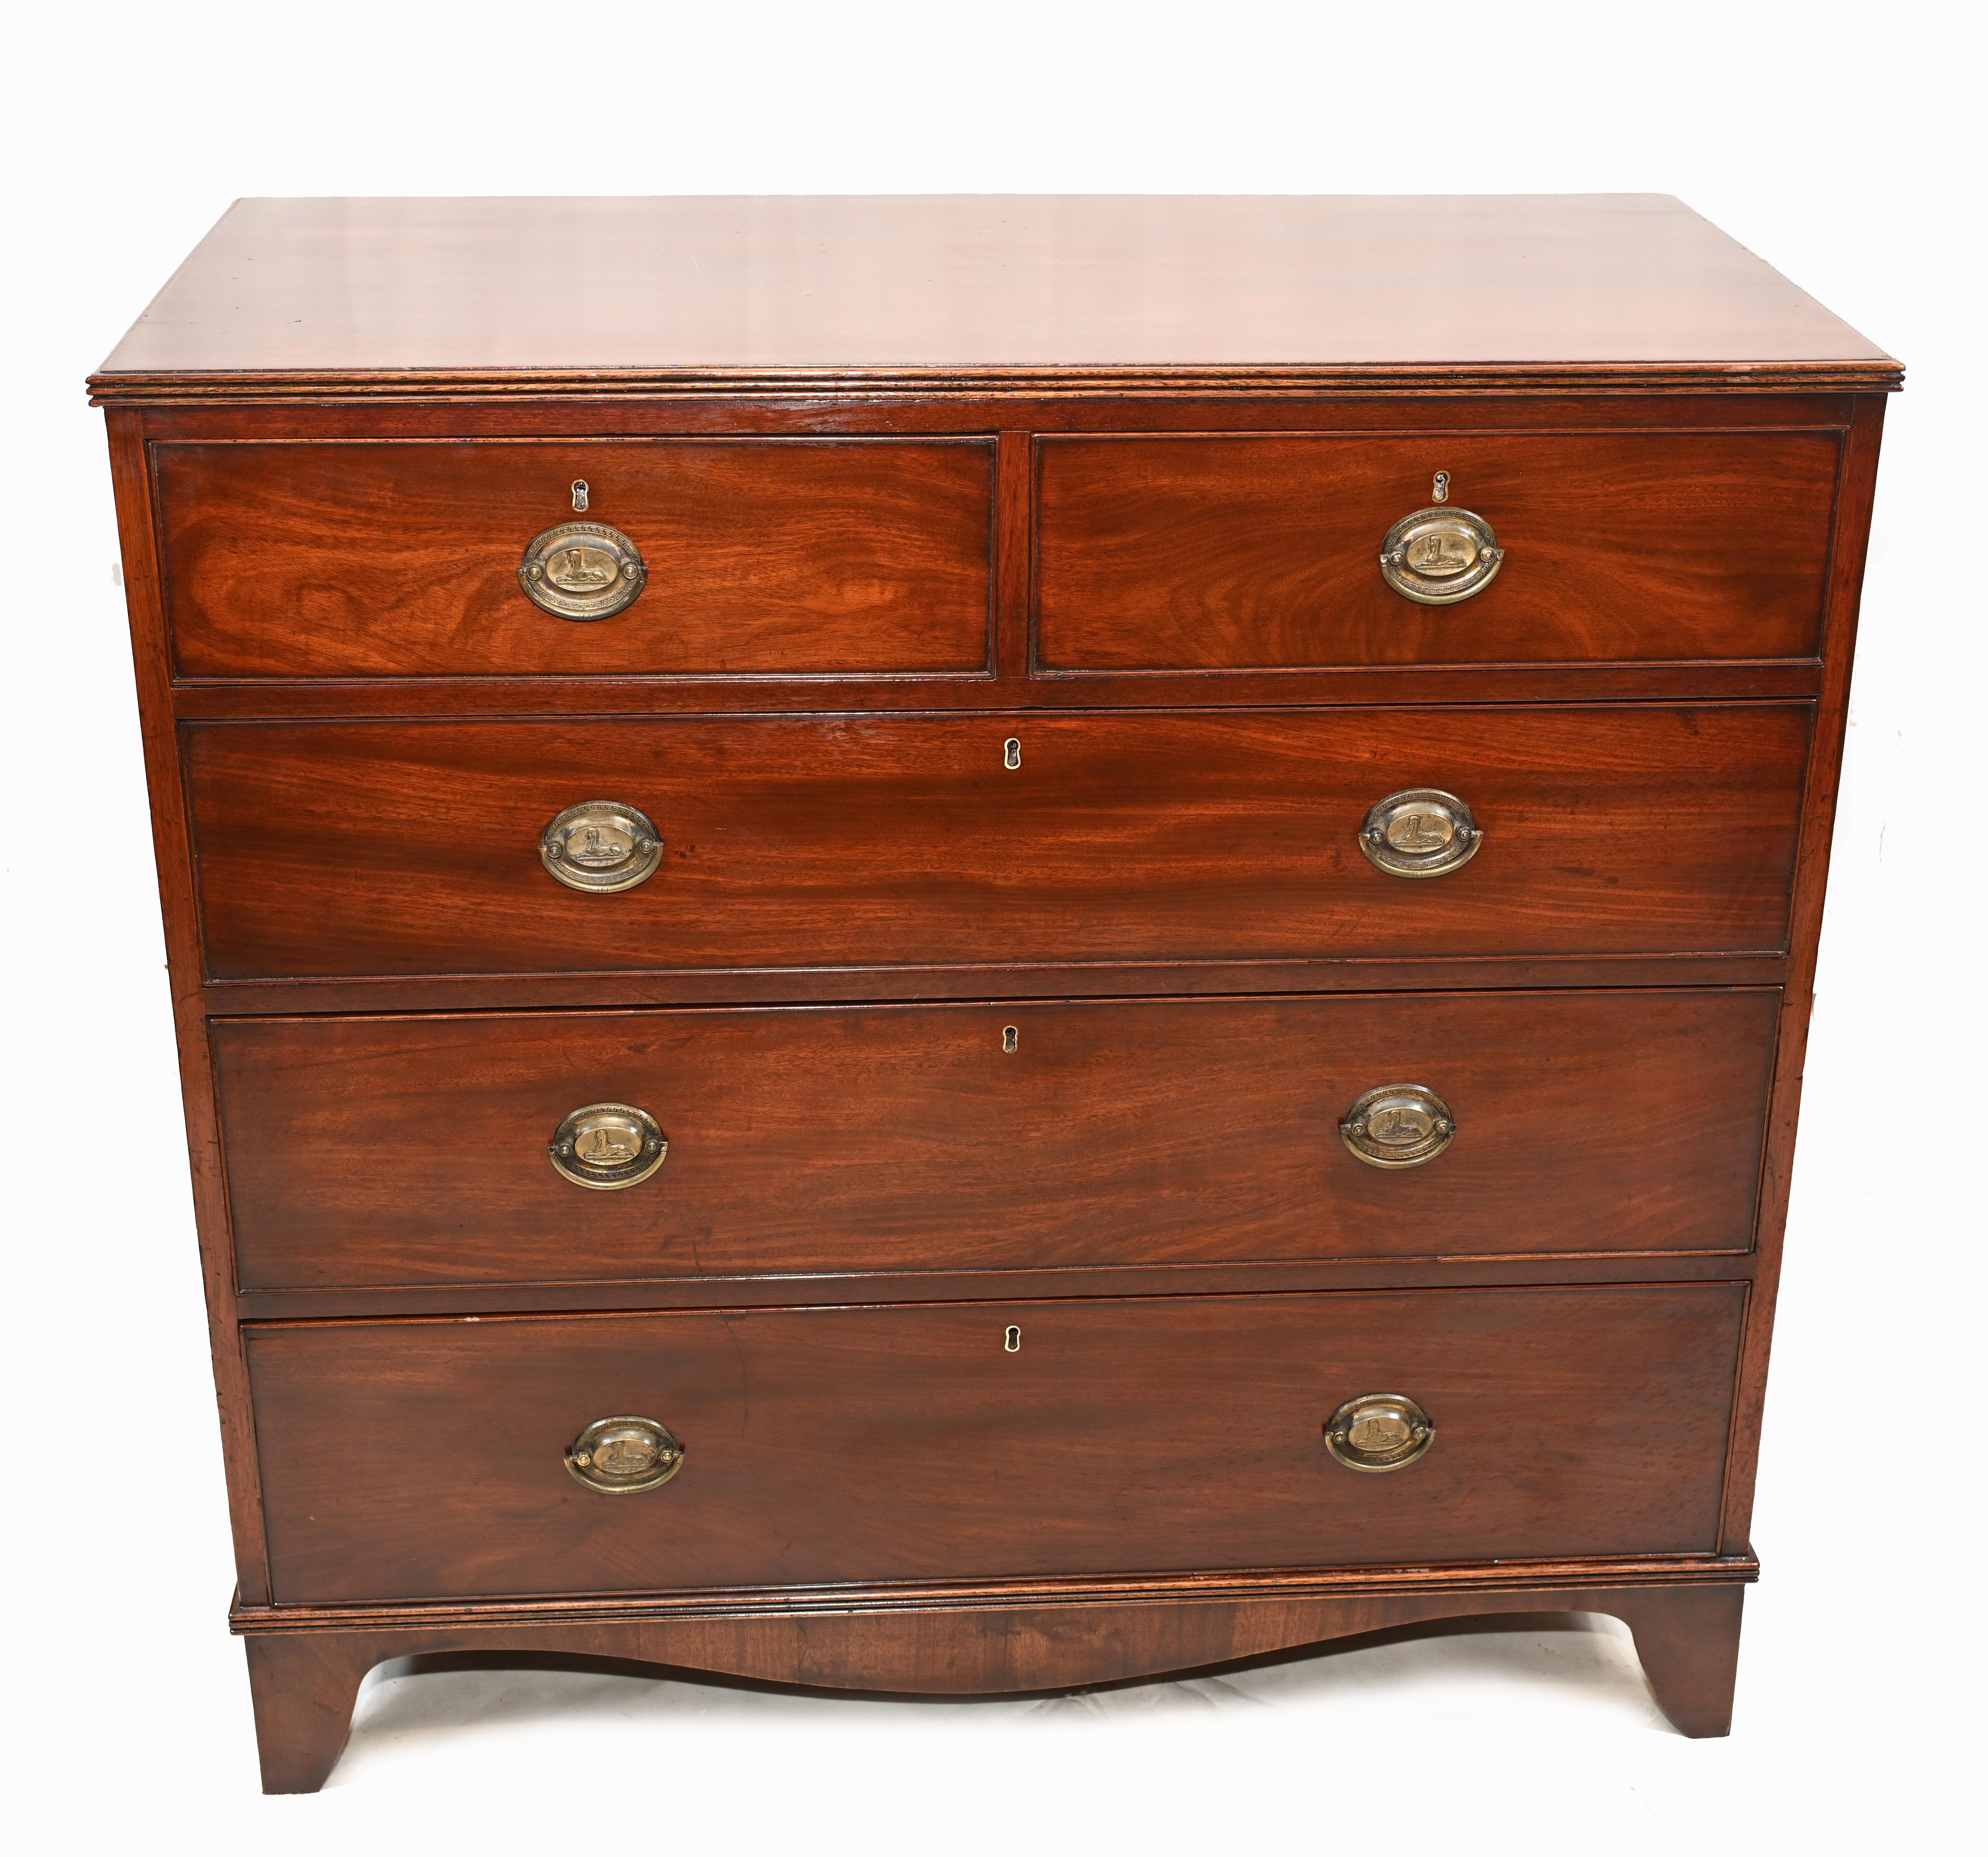 Charming Georgian chest of drawers in mahogany
Clean and simple design in the Hepplewhite manner
Circa 1810 on this fine piece of elegant English furniture
Great patina to the wood, I bet this piece could tell some stories
Some of our items are in